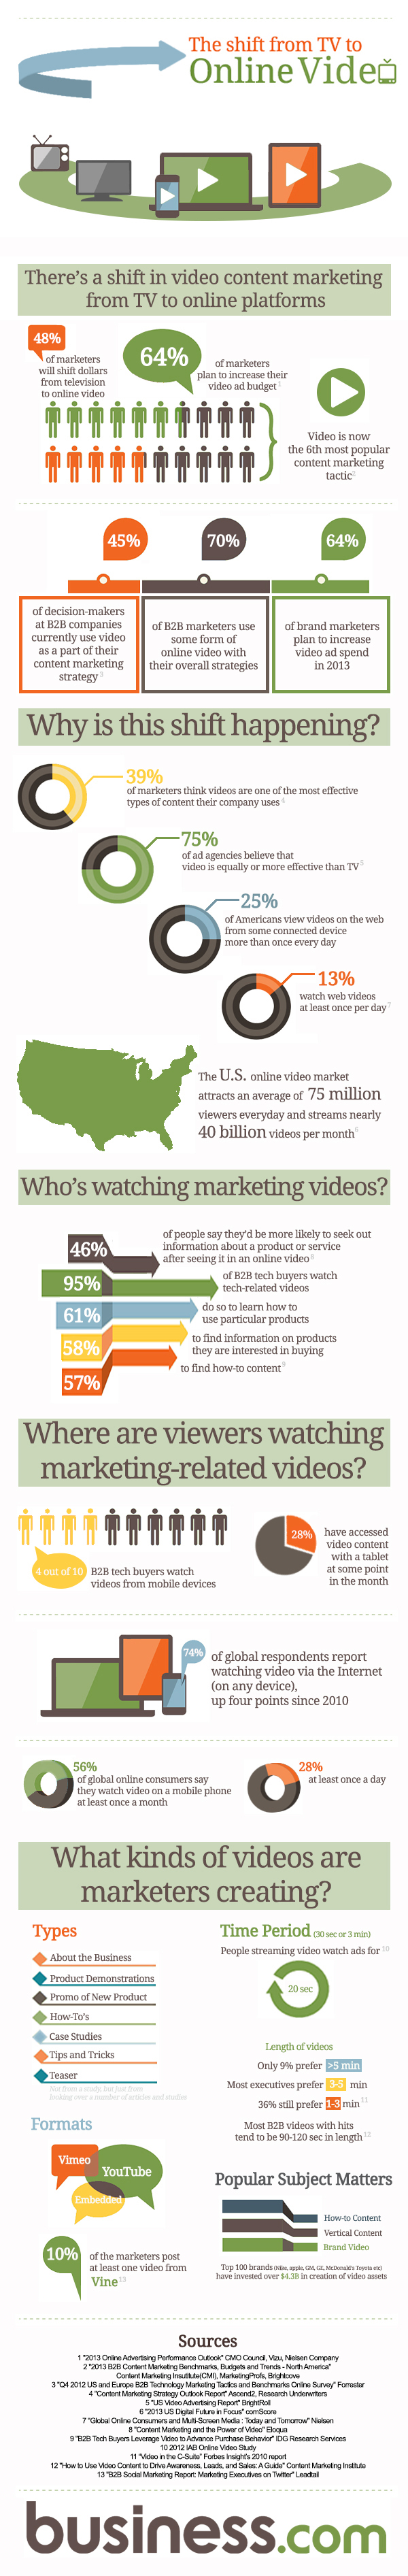 The Shift from TV to Online Video